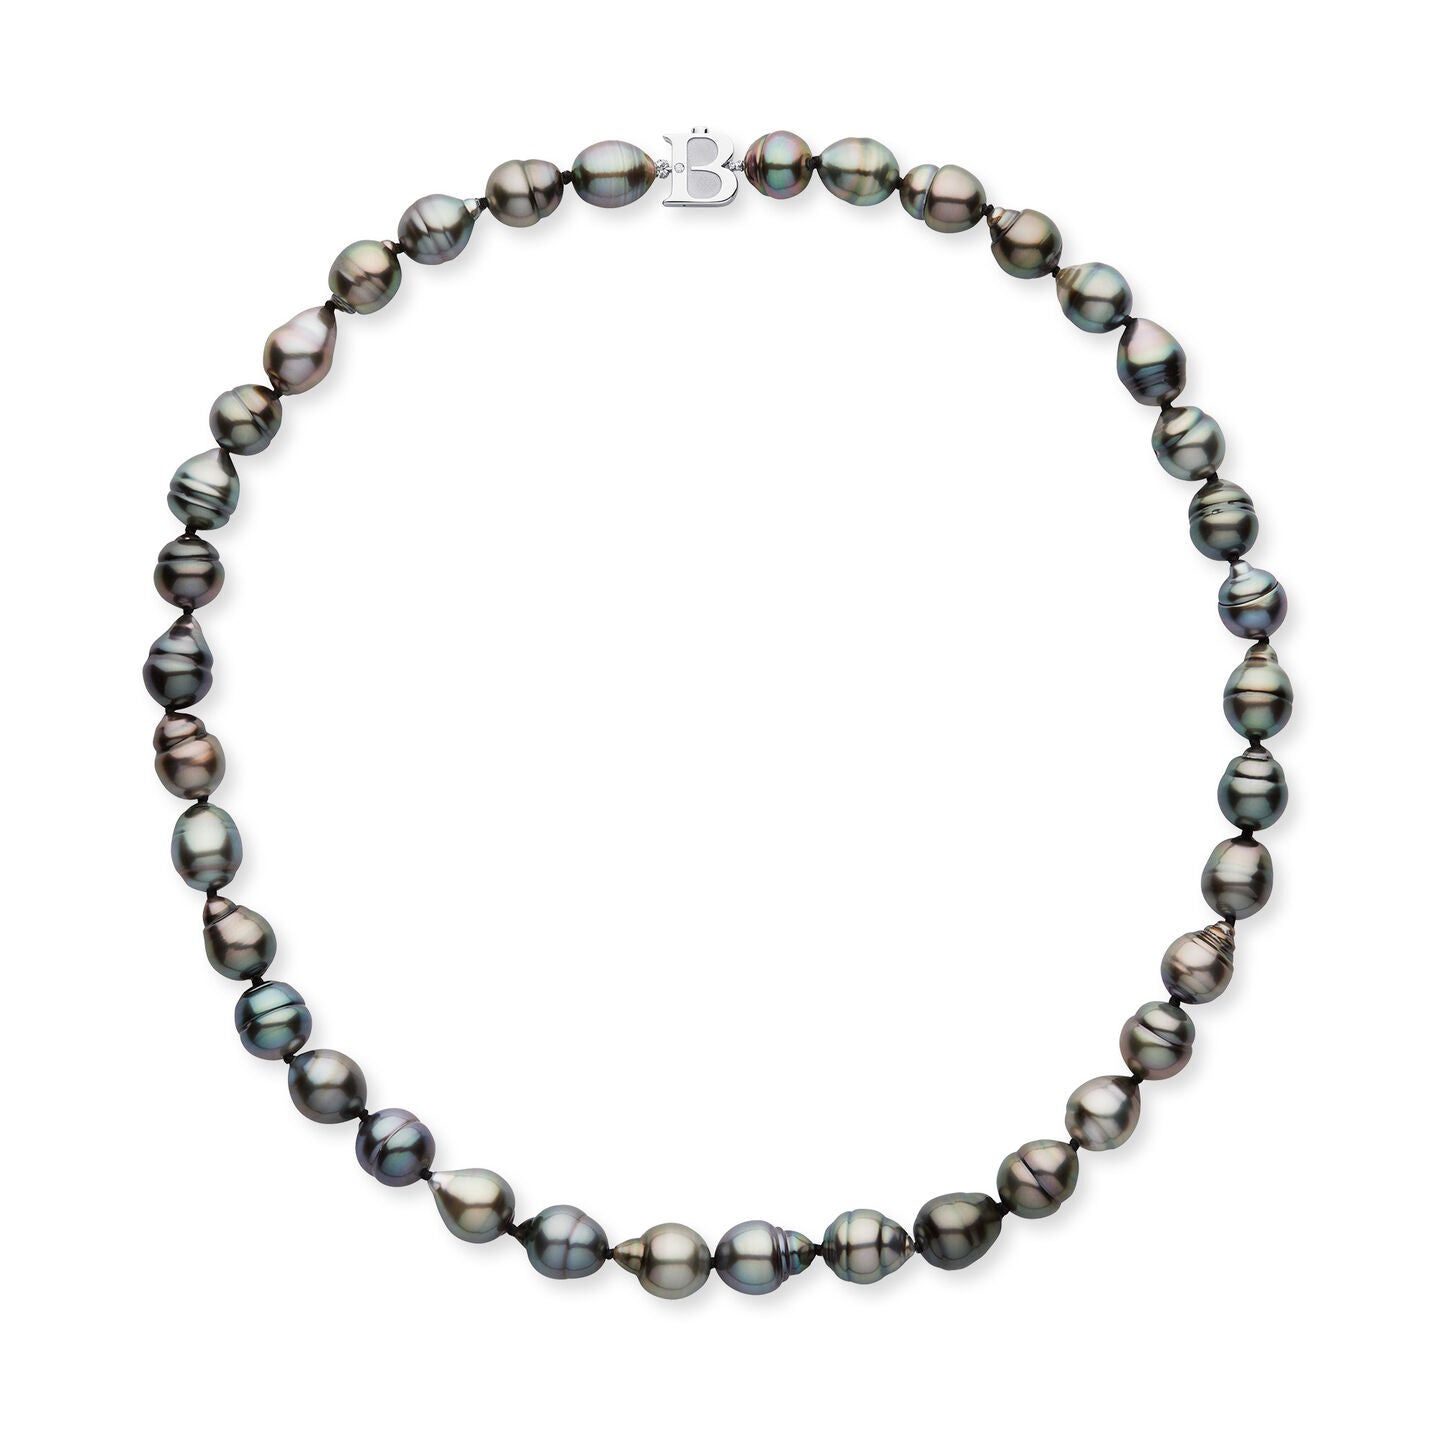 Birks Pearls 8-10mm White Gold Tahitian Necklace 450017311802